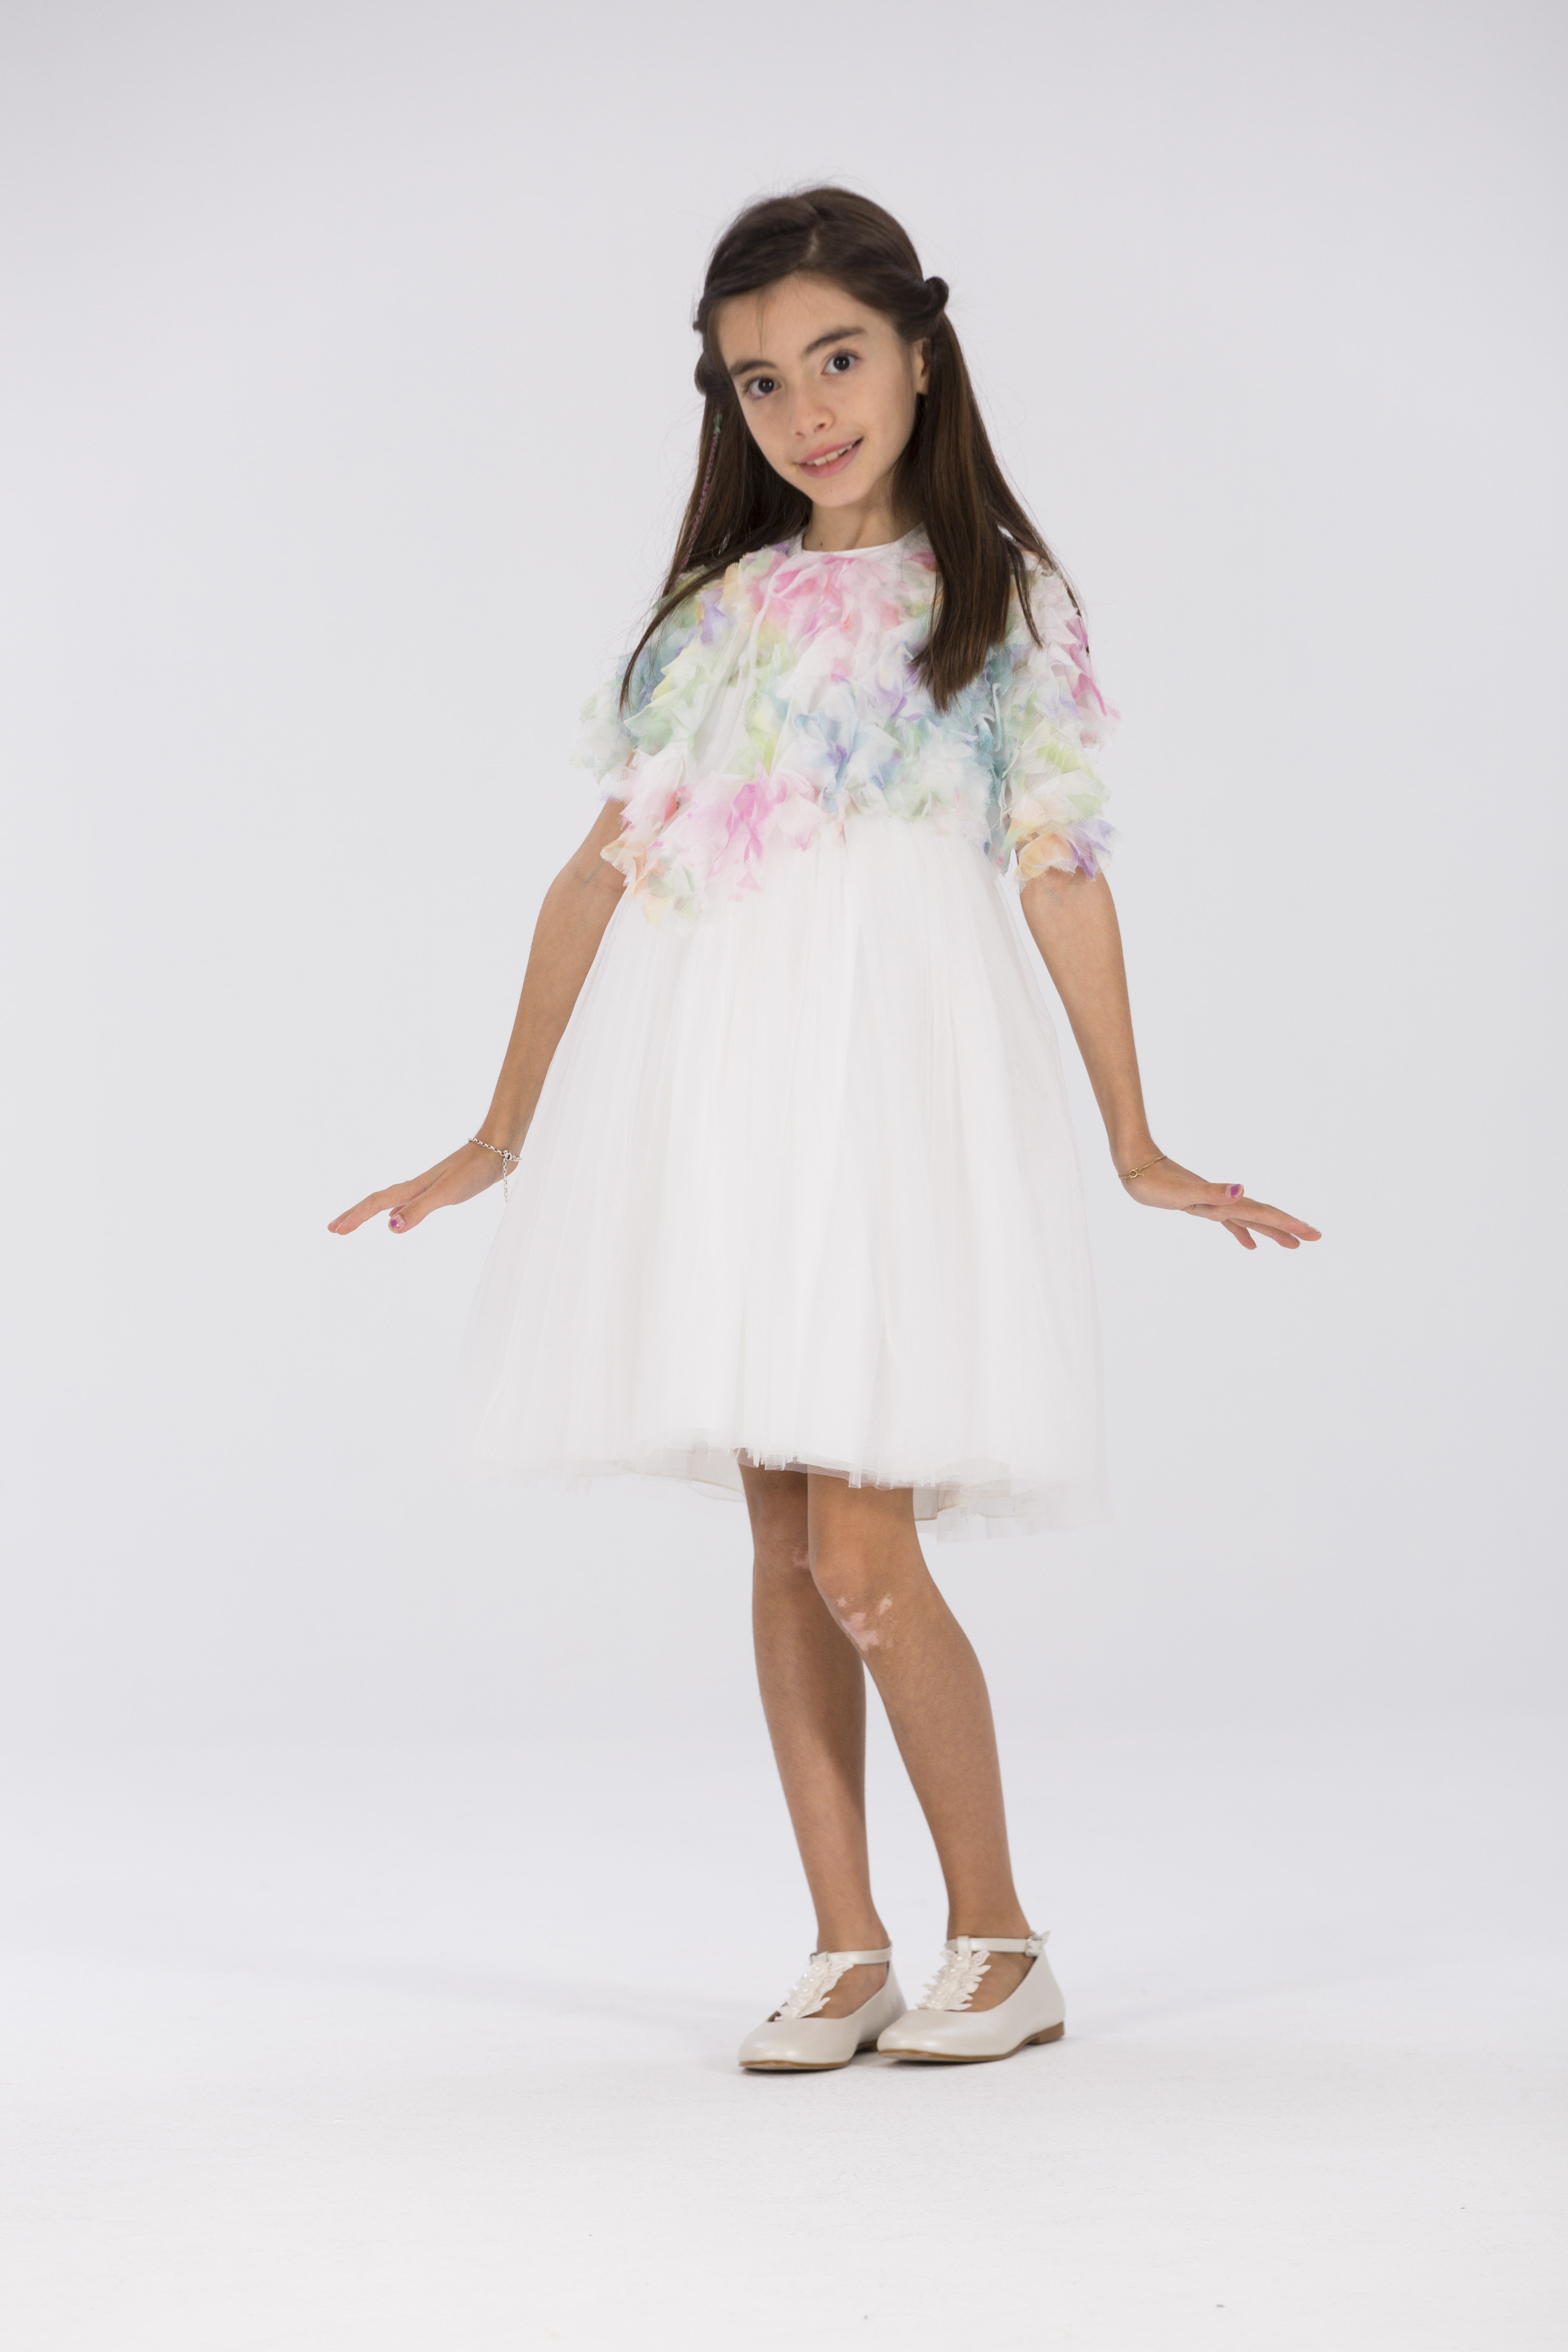 Girls | Off White Tulle Dress with Multicolor Poncho | Speranza